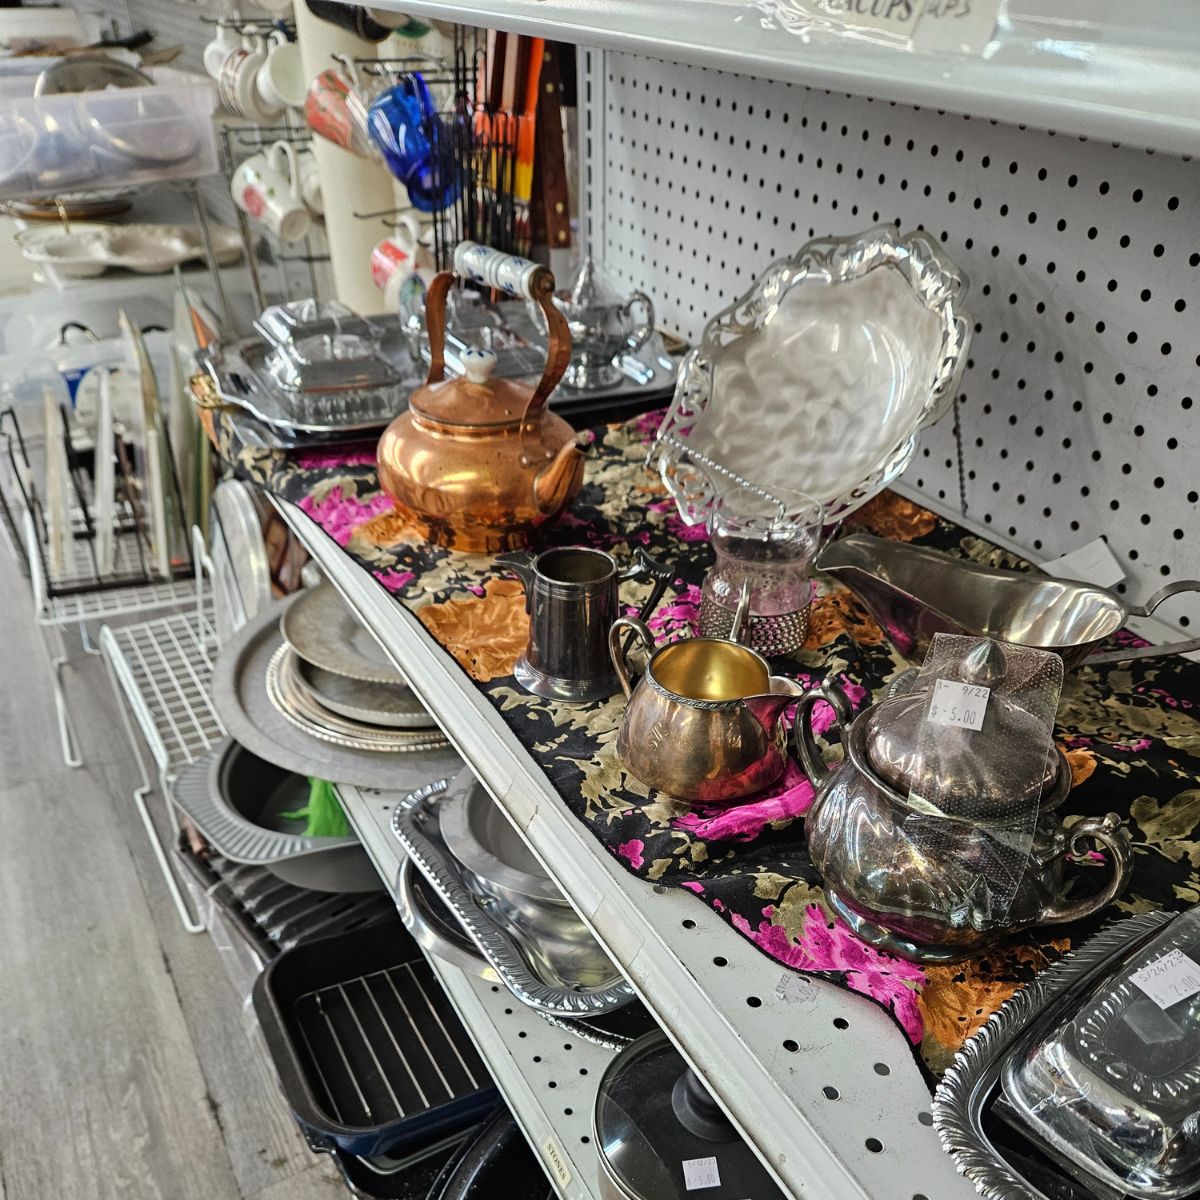 Thrift store shelves filled with an assortment of dishes & kitchenware including silver & copper serving dishes.